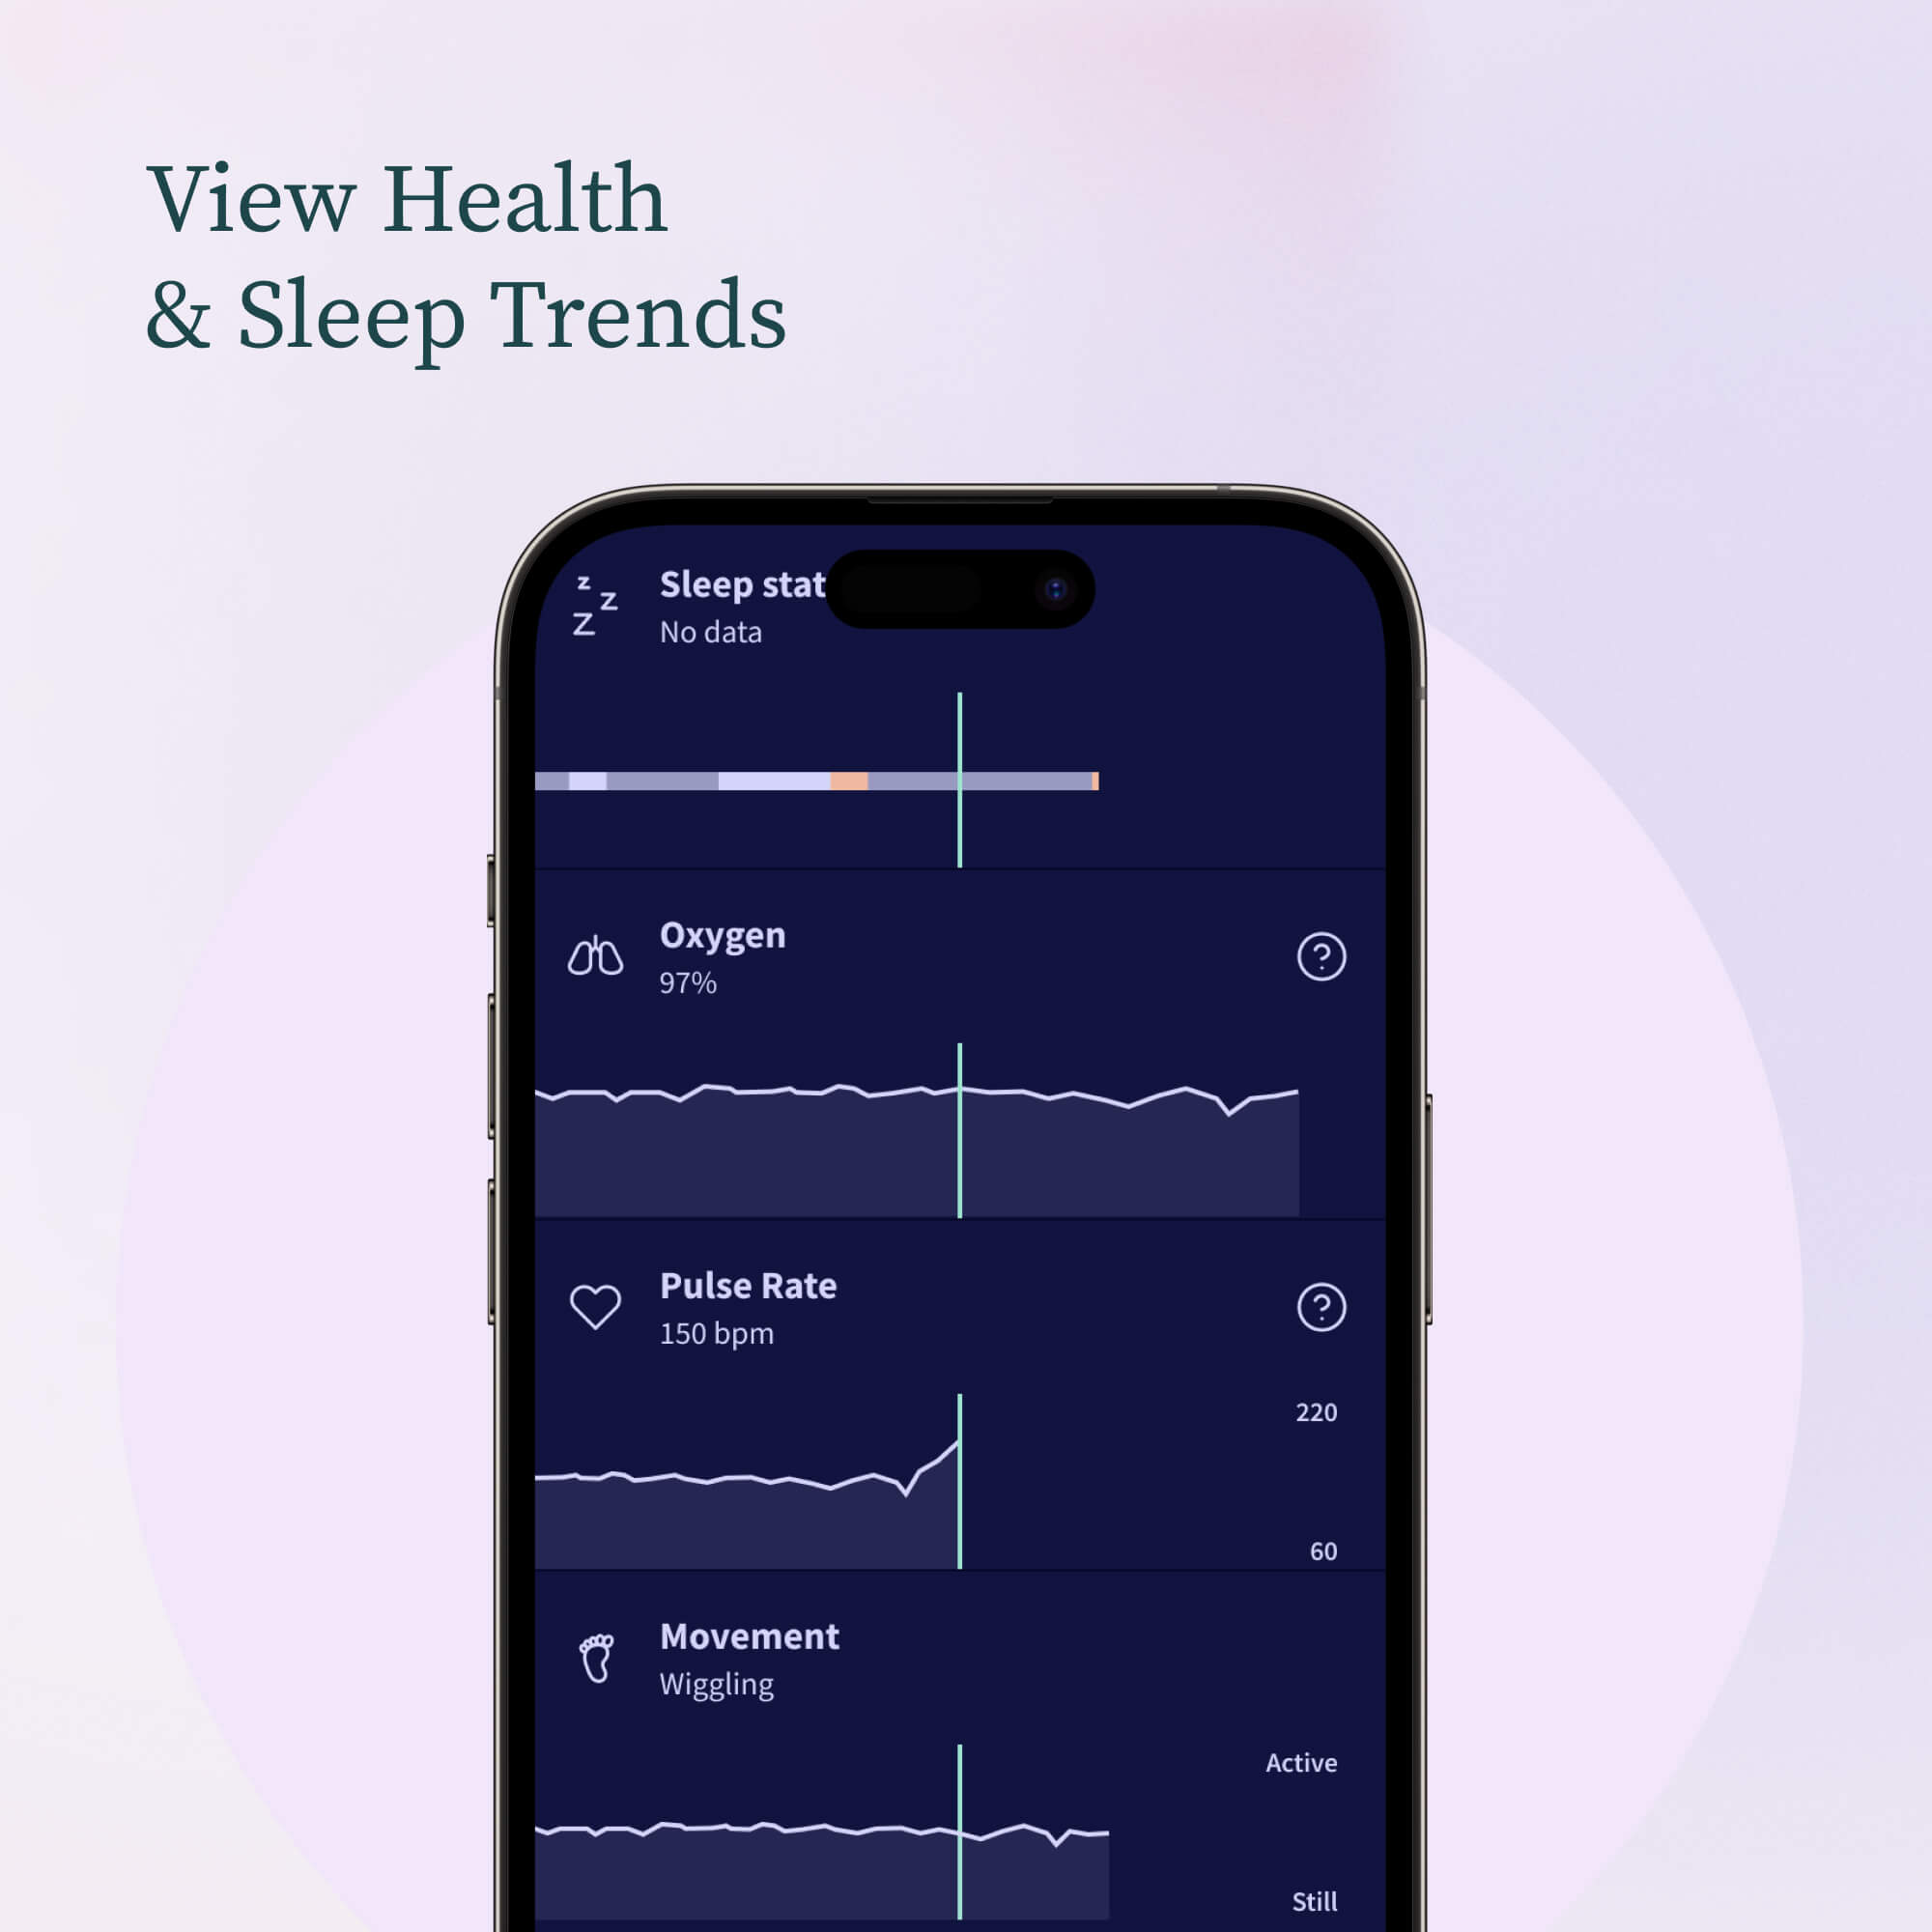 View health and sleep trends